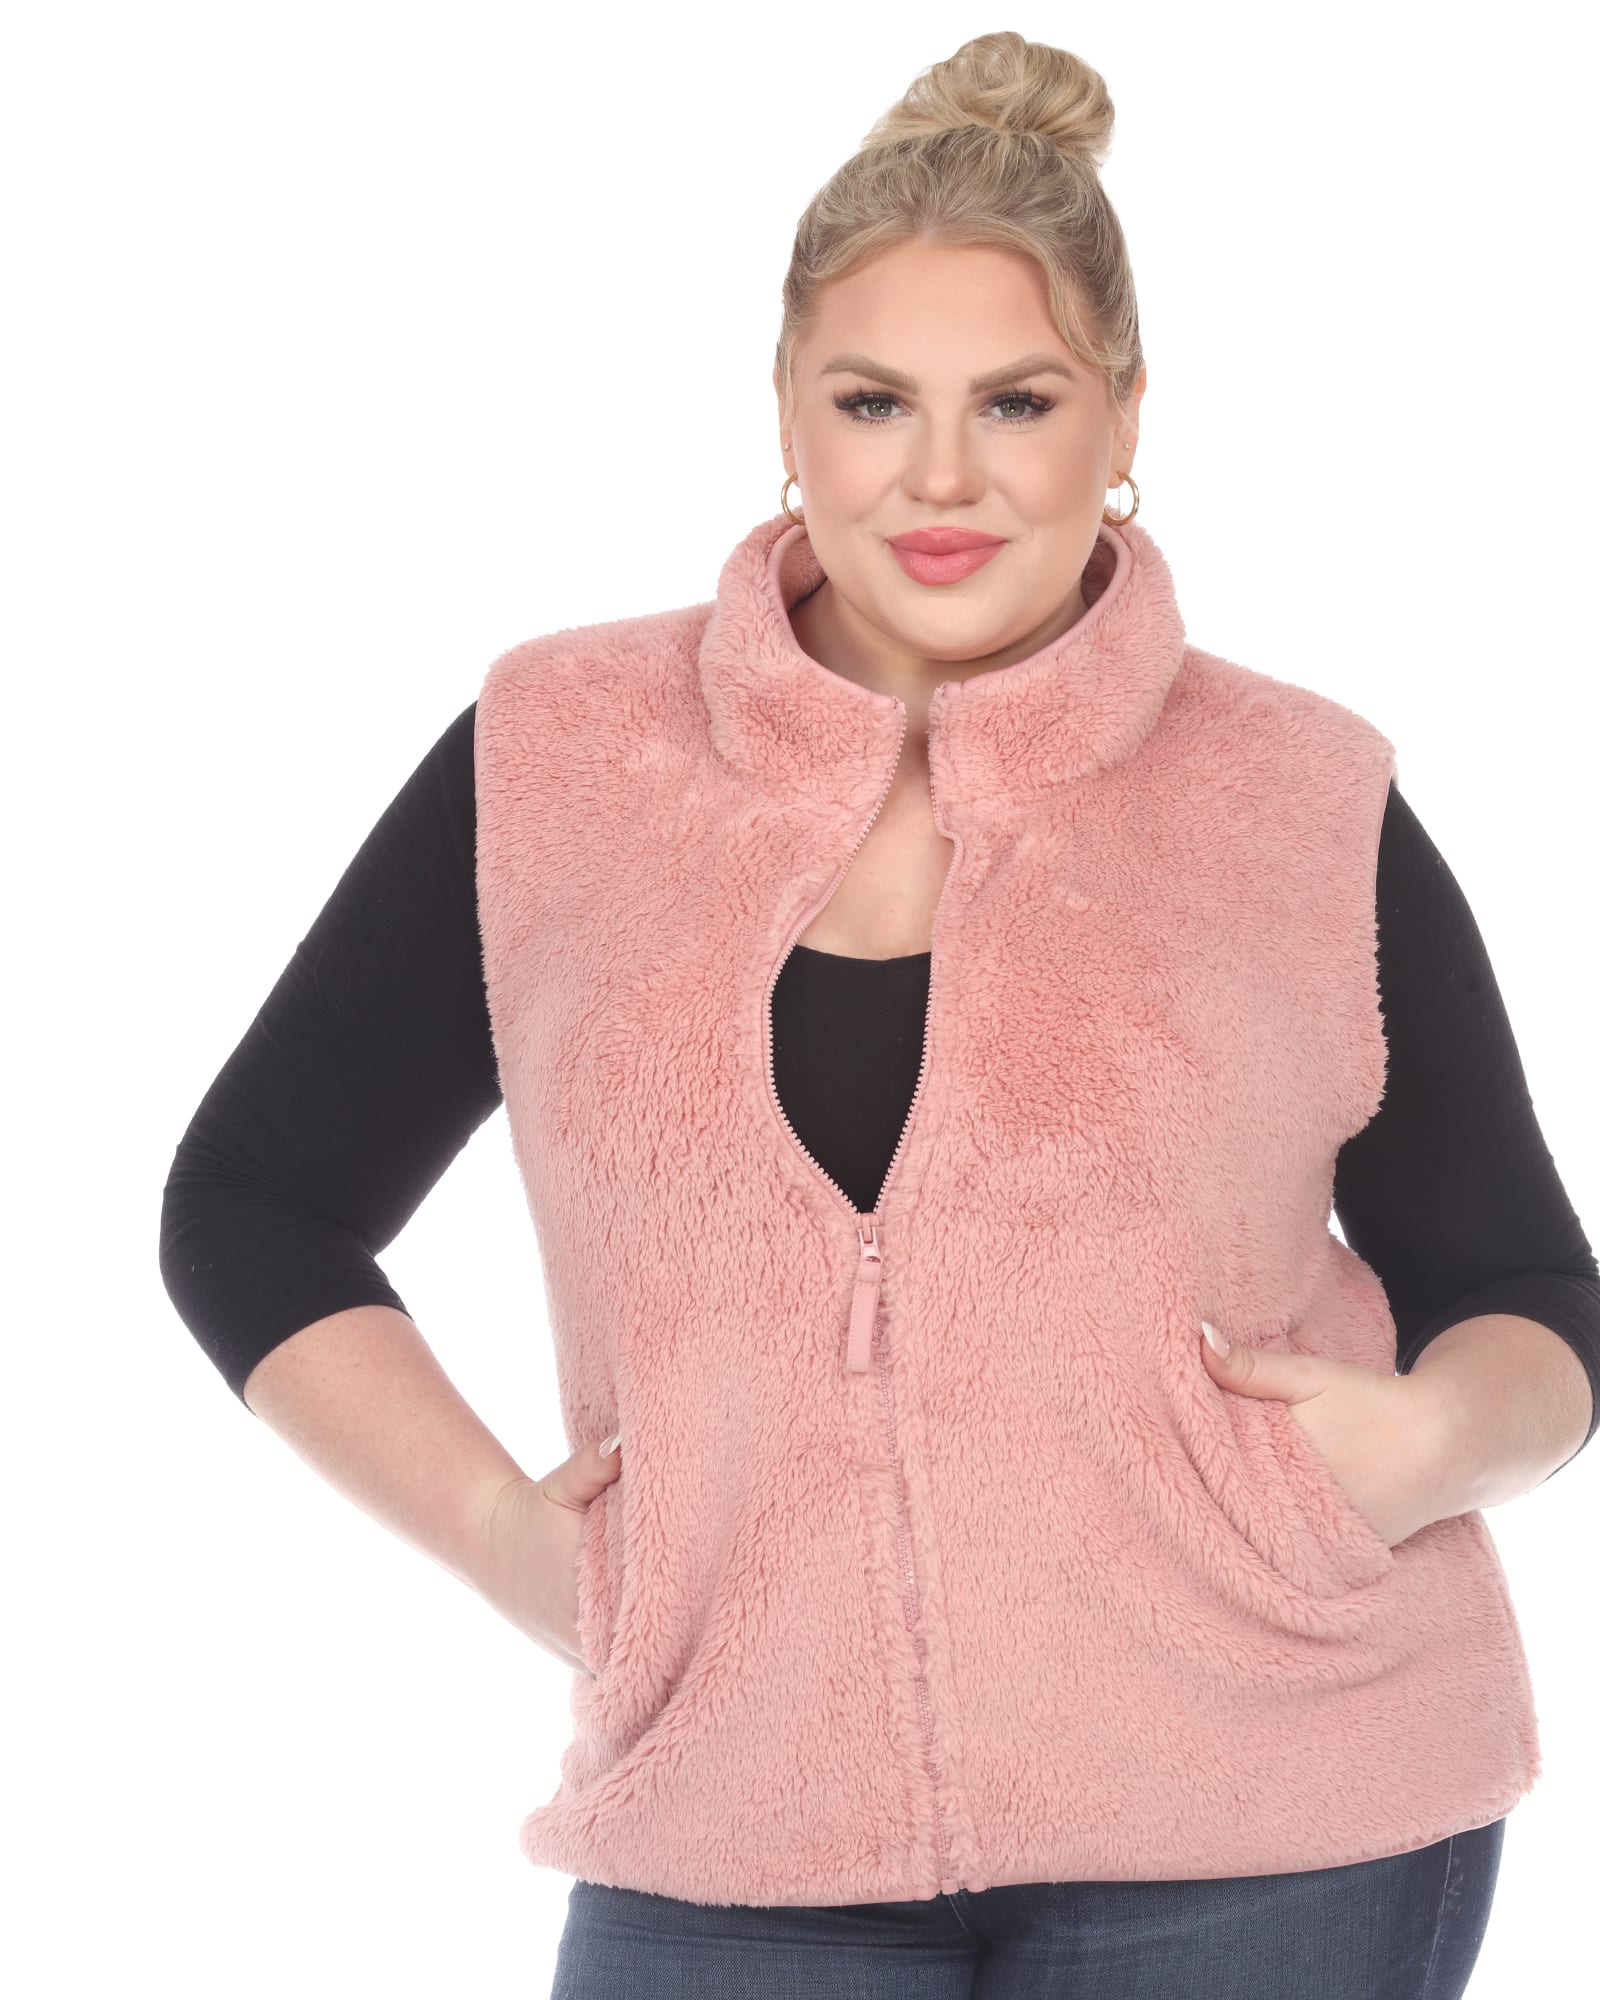 Outerwear Vests For Women